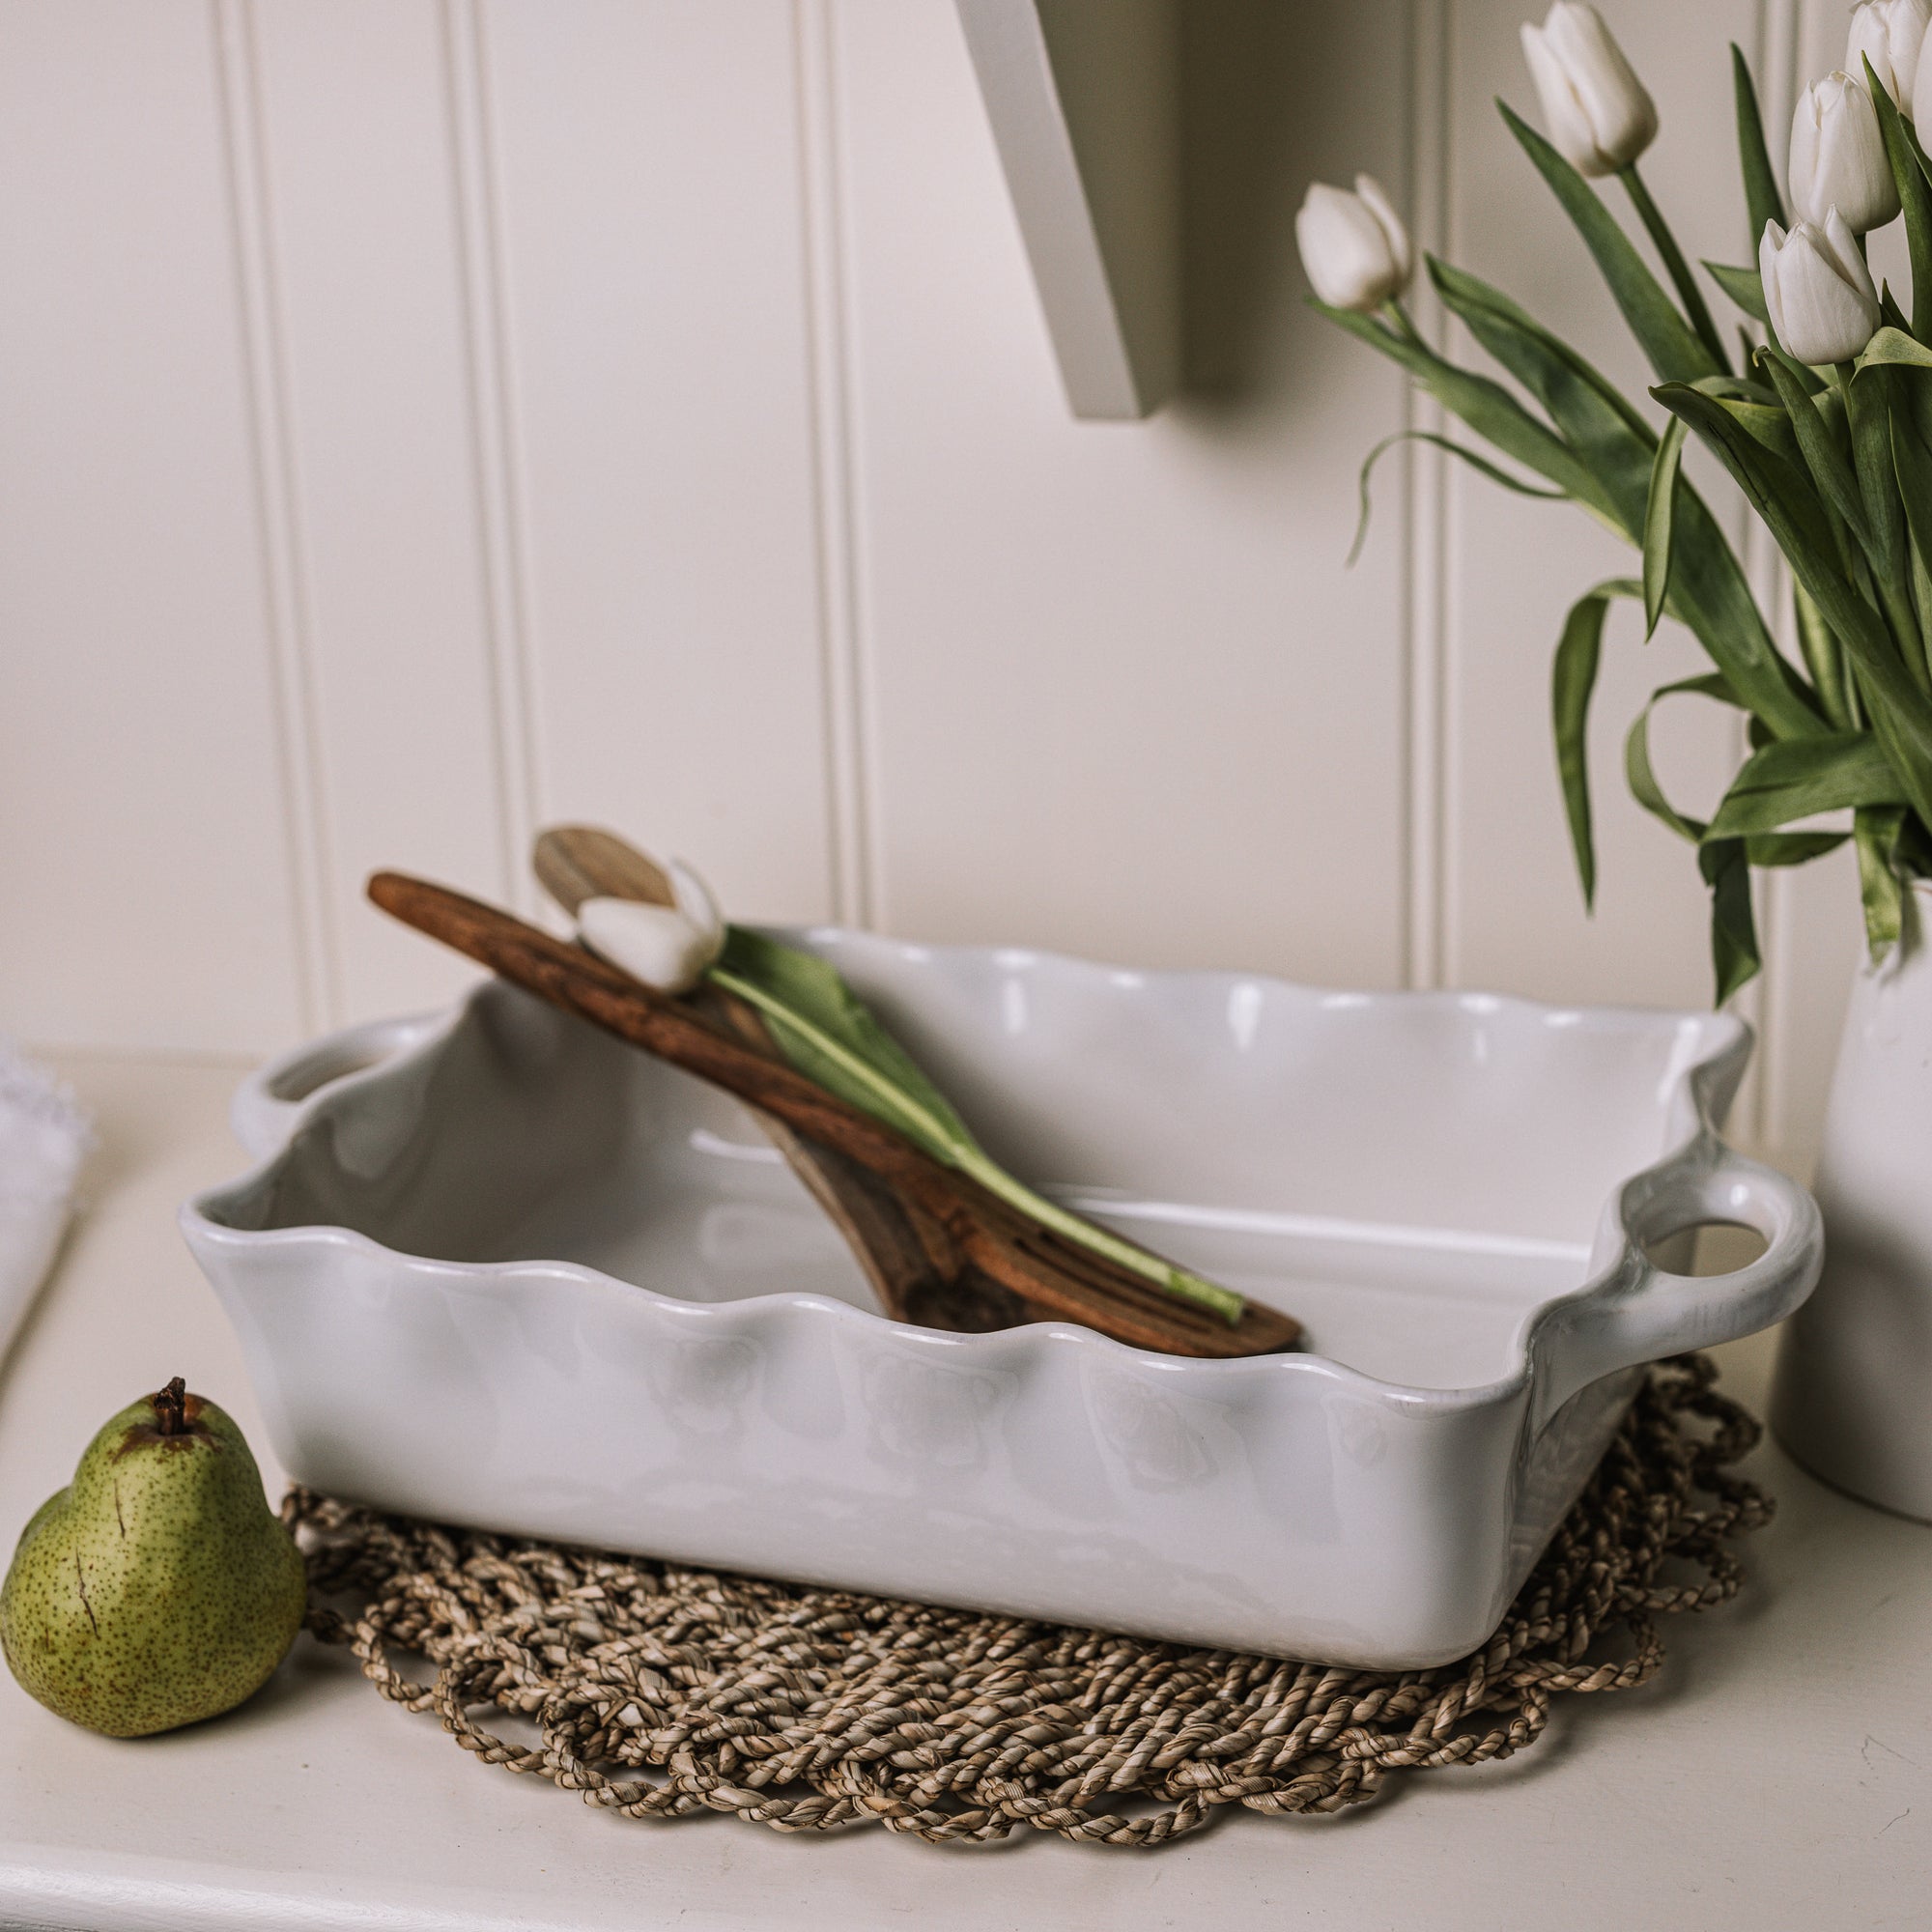 Large white baking dishes with handles and pie crust edge.